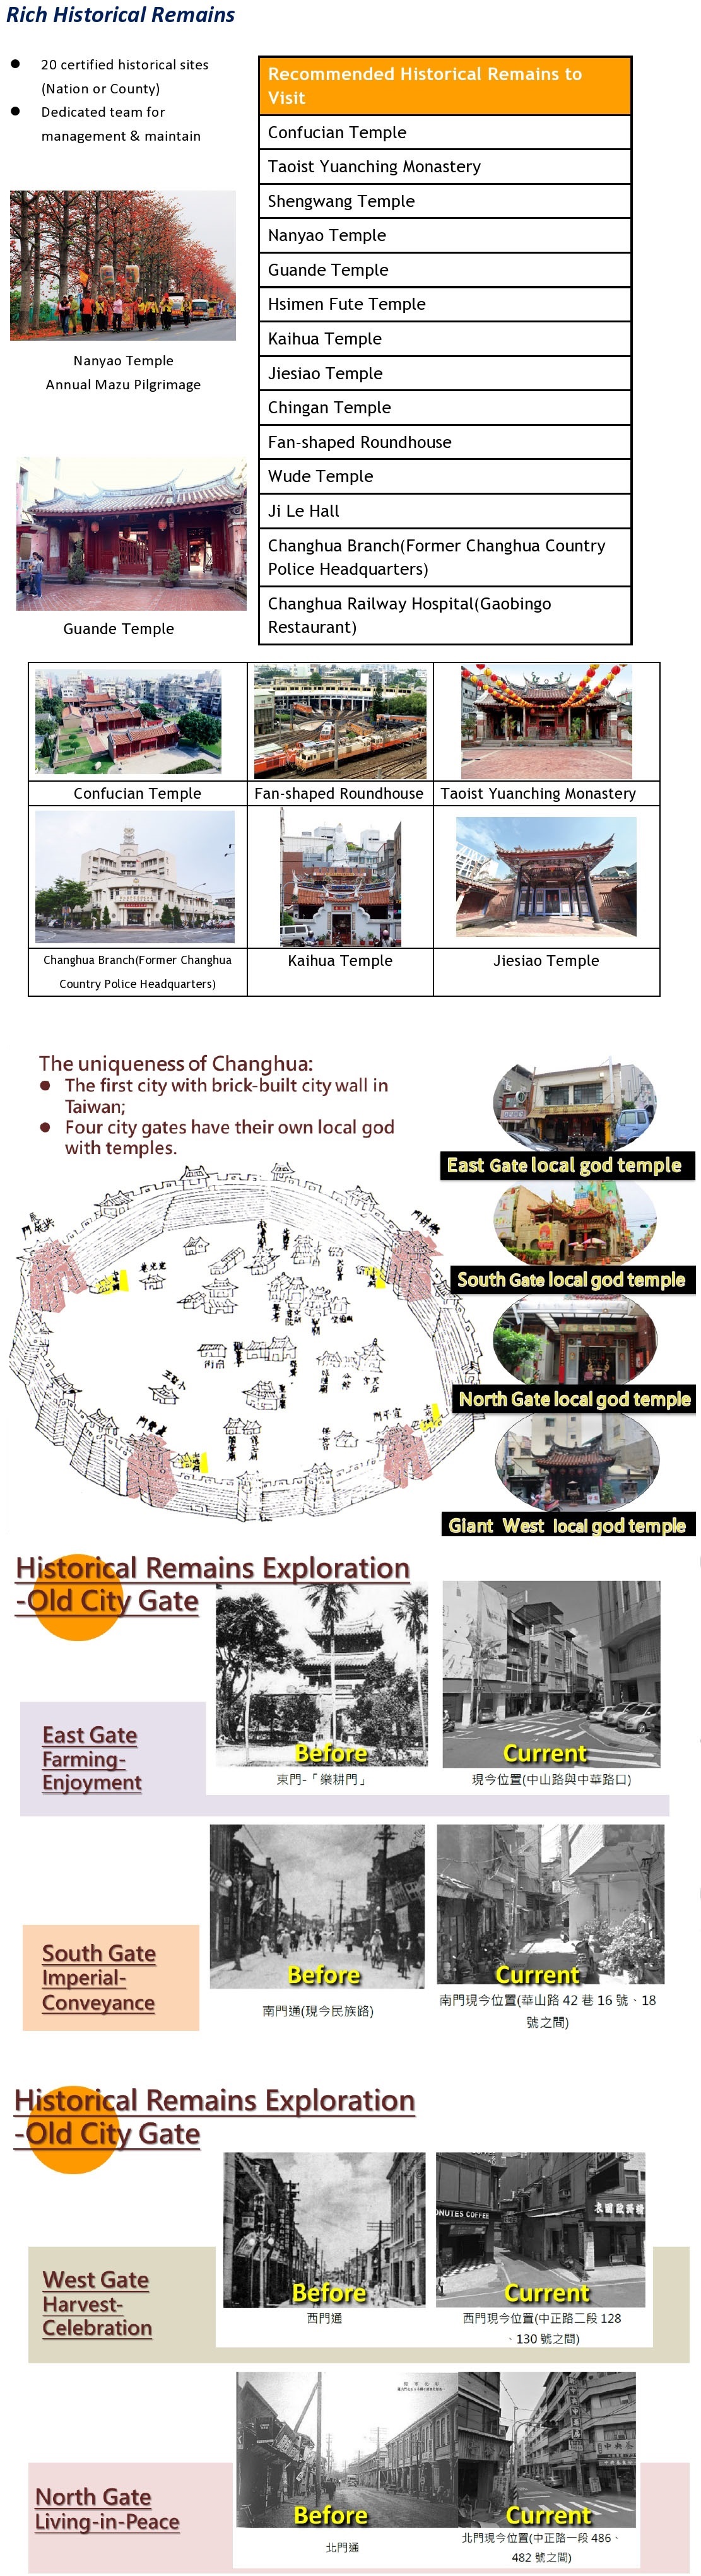 Image:Rich Historical Remains (Open New Window) 